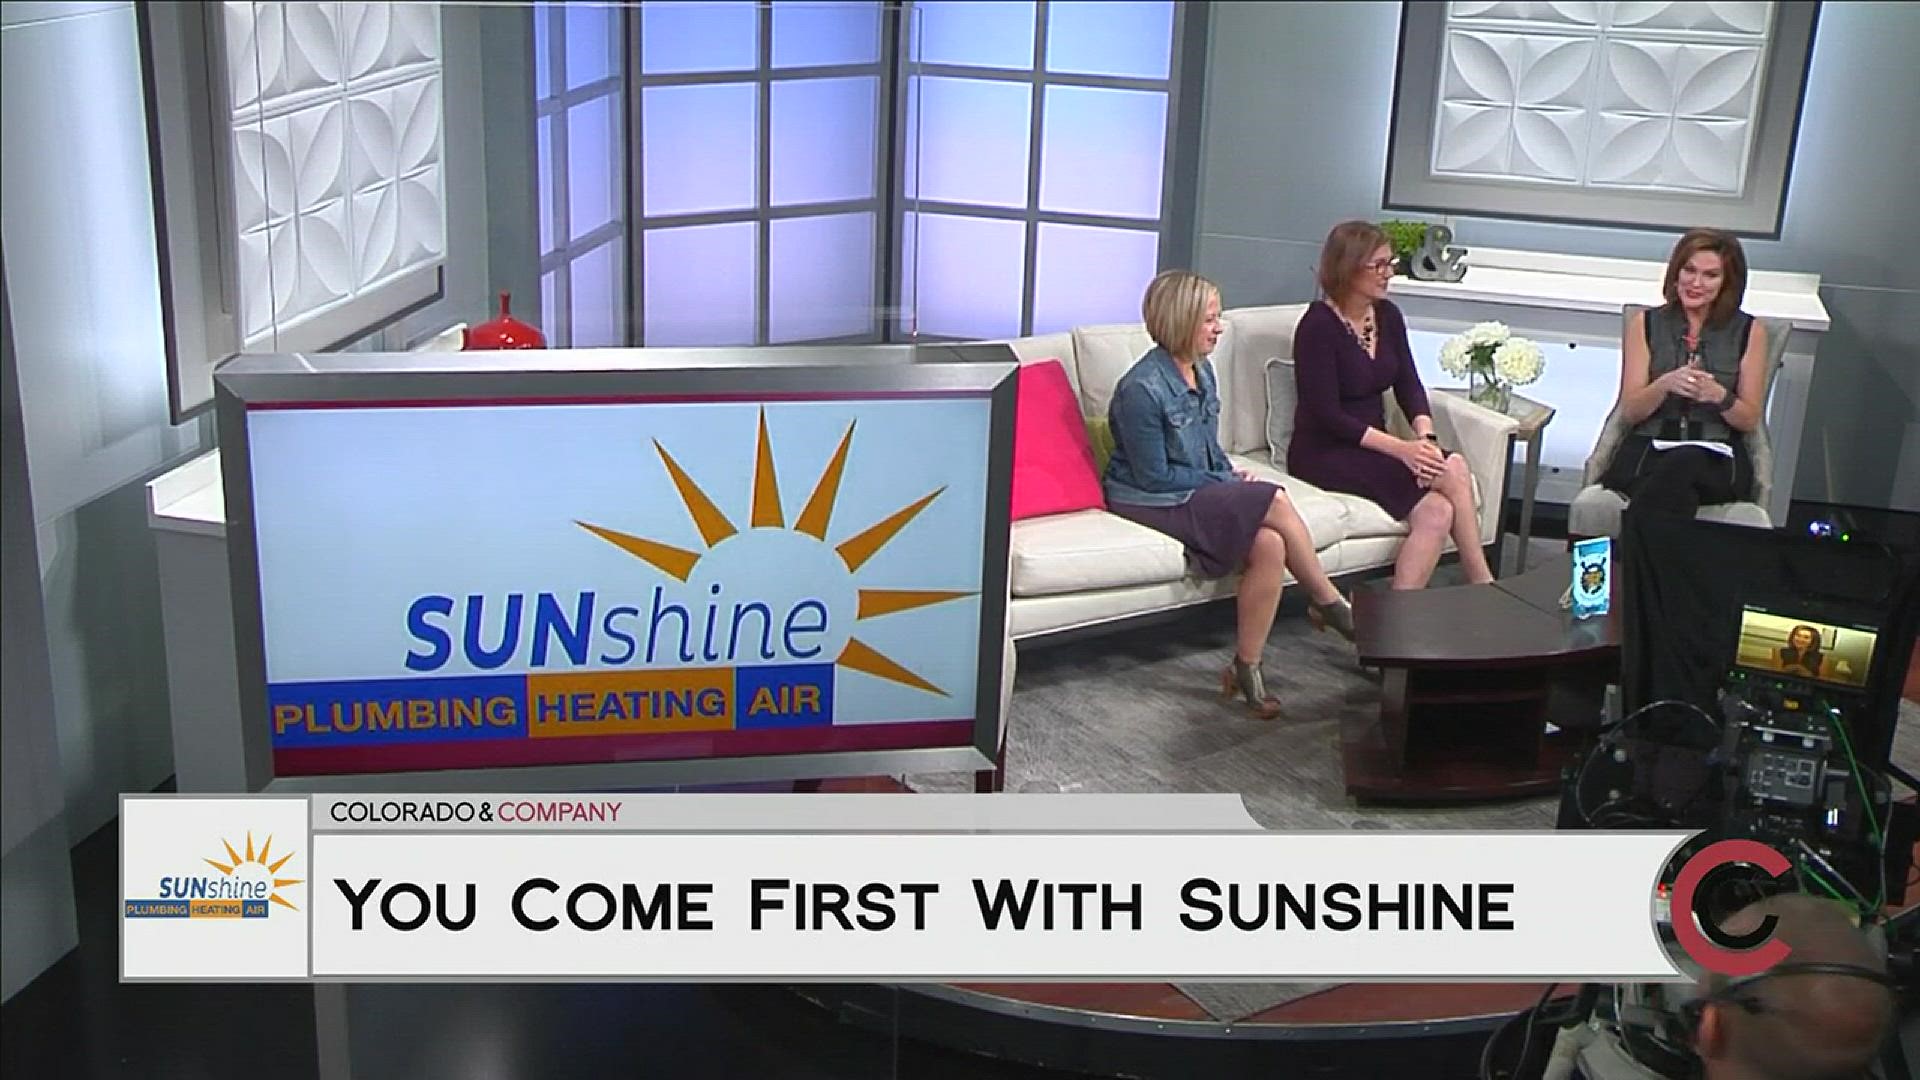 It’s AC season, so call 720.650.7772 to make sure your air conditioner is ready for the hot weather to come. Colorado and Company viewers get tune ups for just $49 or get $50 off any plumbing job. Learn more at www.SunshinePHA.com. 
THIS INTERVIEW HAS COMMERCIAL CONTENT. PRODUCTS AND SERVICES FEATURED APPEAR AS PAID ADVERTISING.